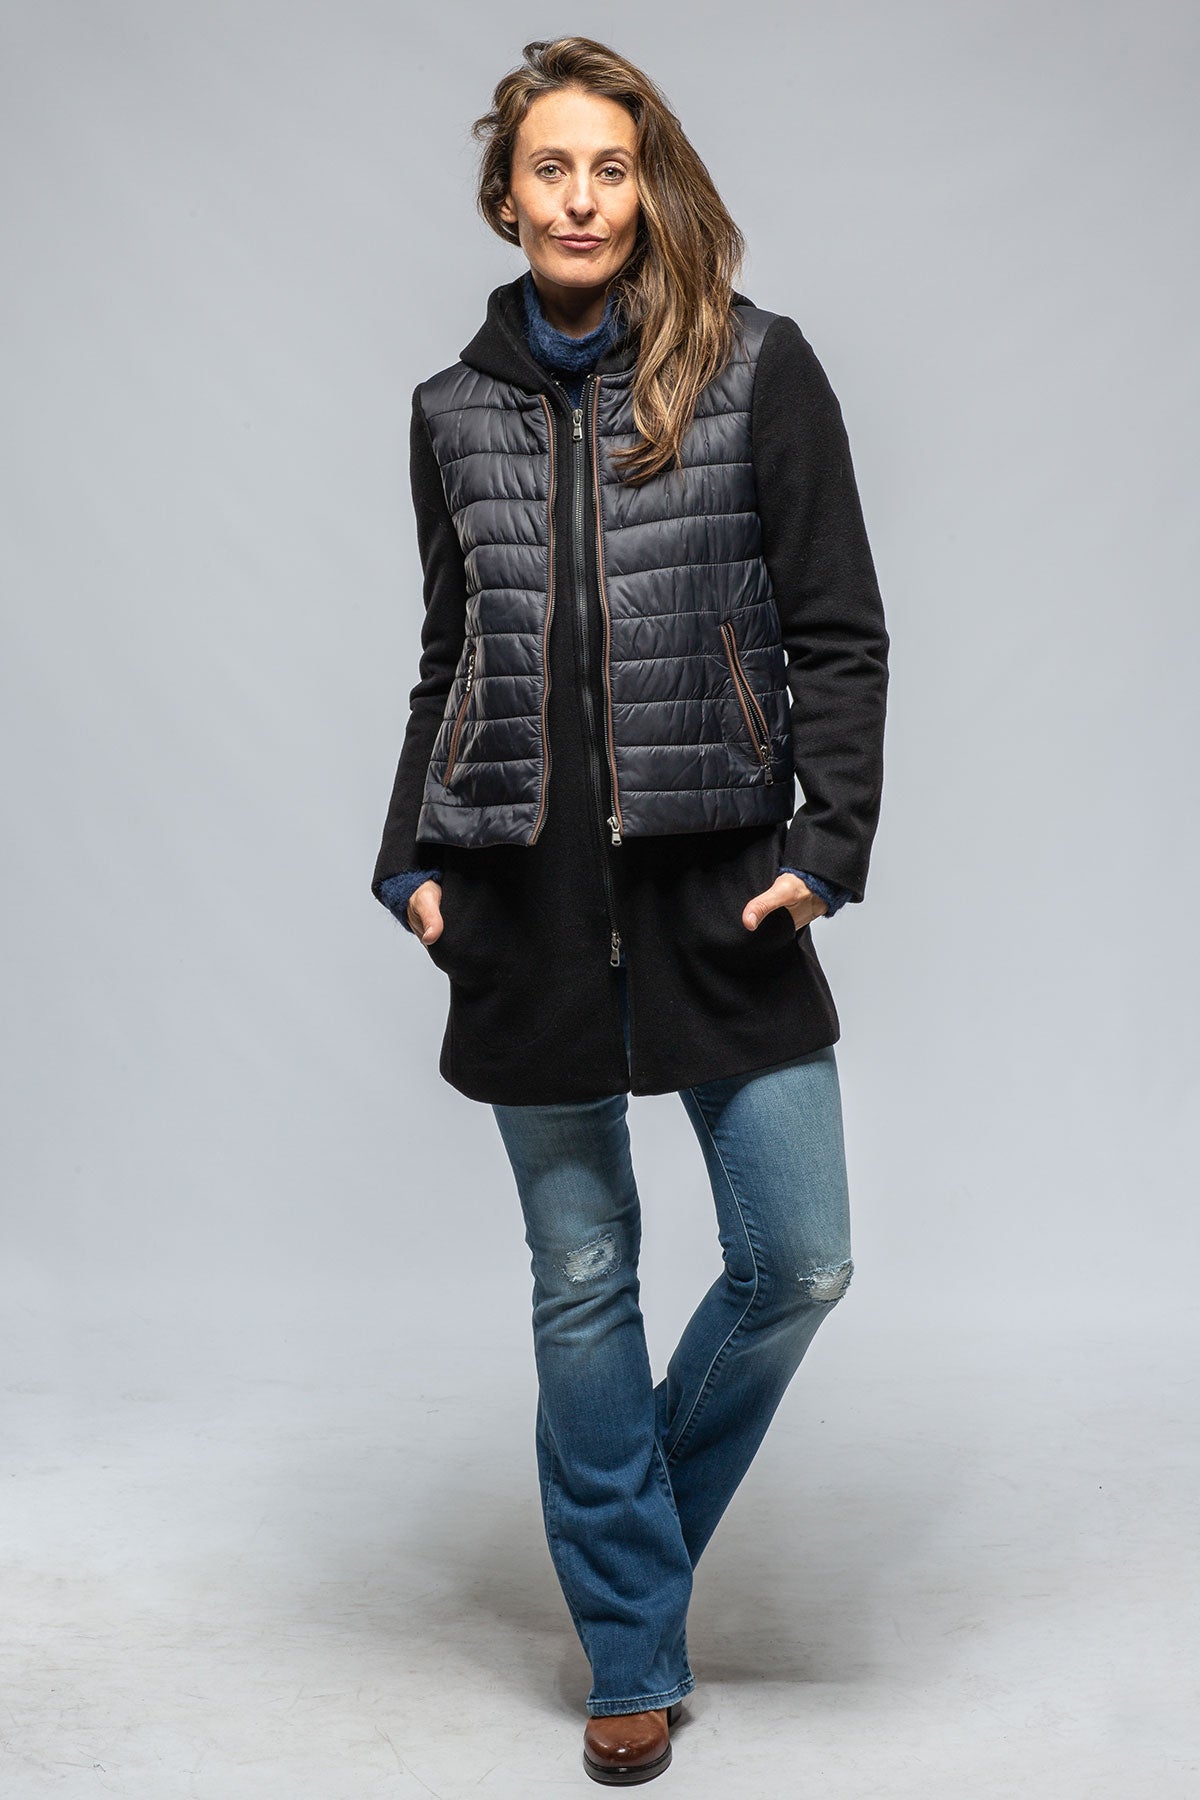 Everdeen Wool/Cashmere Overcoat | Warehouse - Ladies - Outerwear - Cloth | Gimo's